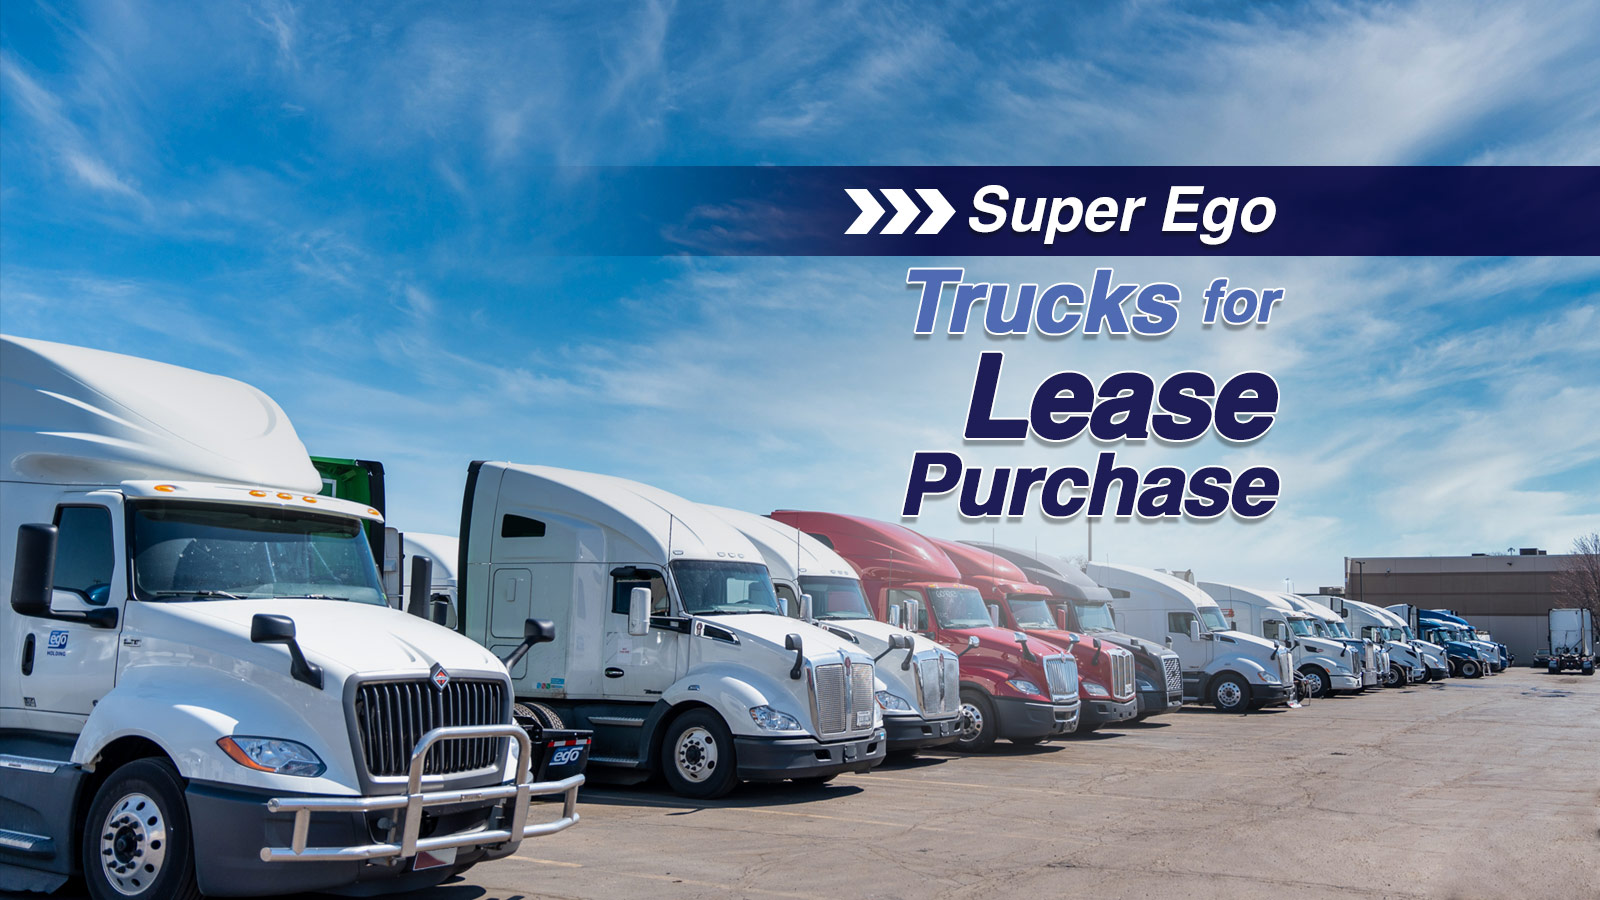 Super Ego Trucks for Lease Purchase